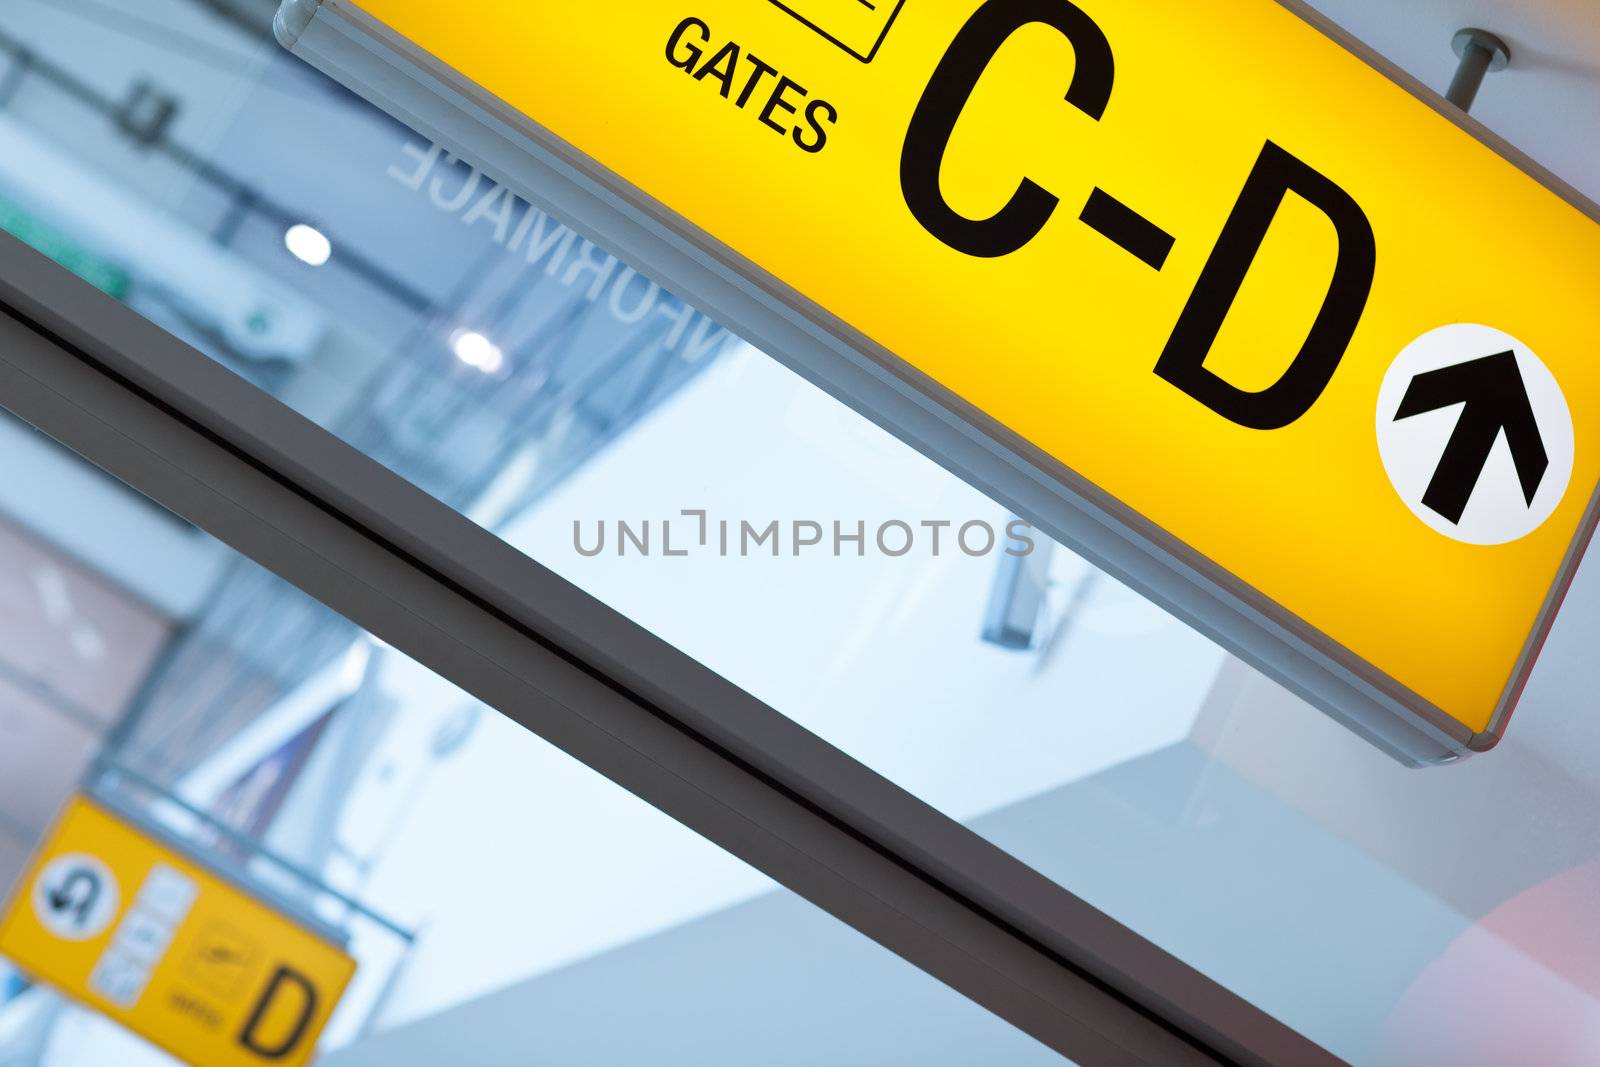 signs at an airport by viktor_cap